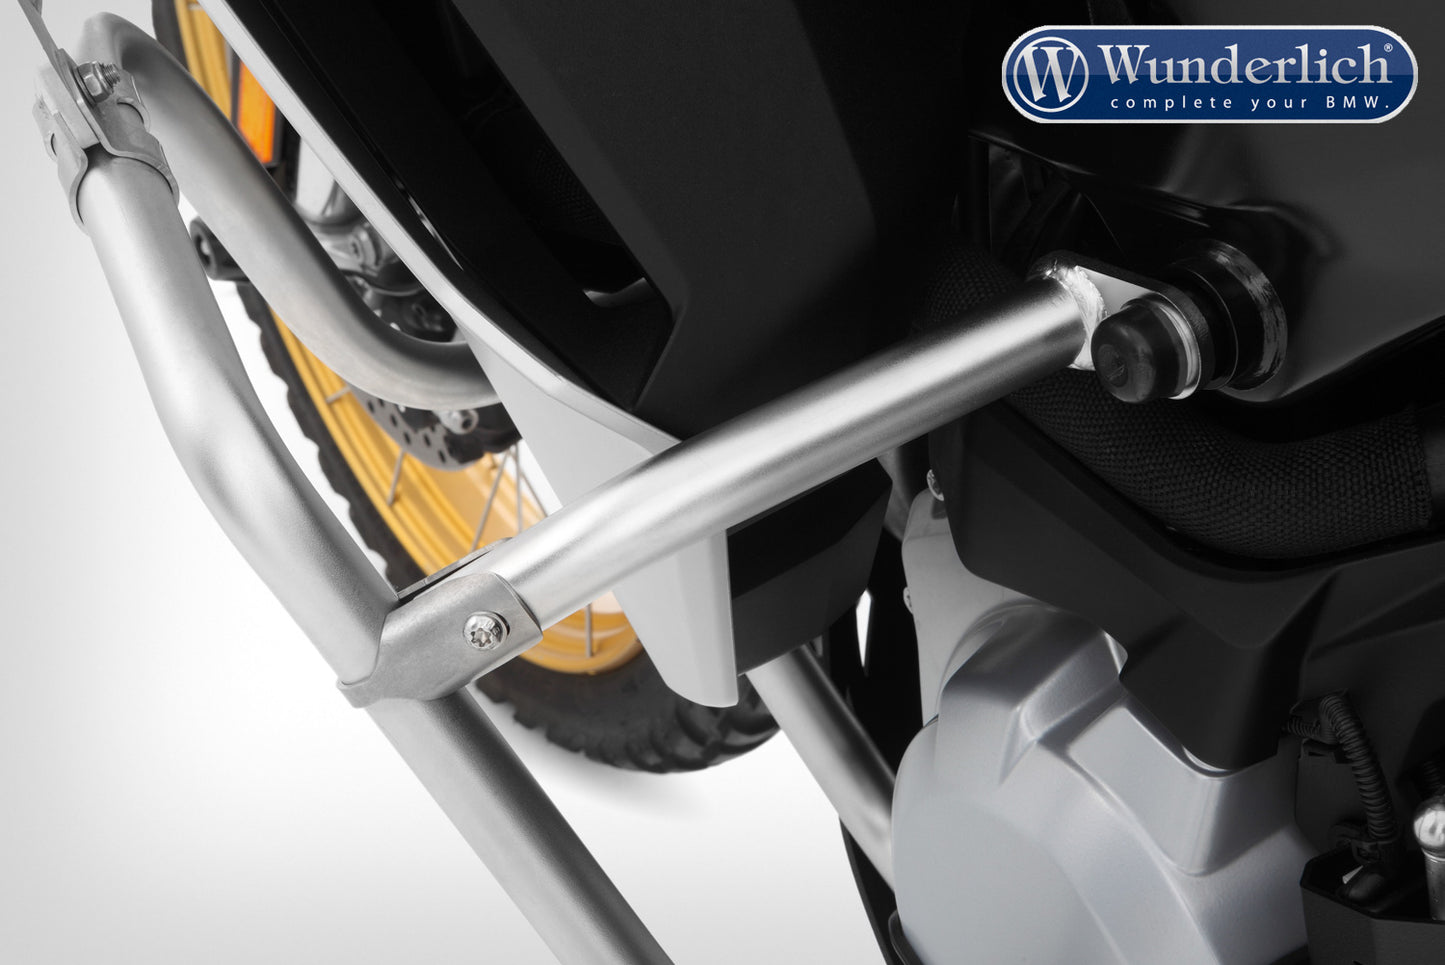 Wunderlich reinforcement bar for the original engine protection bar - stainless steel